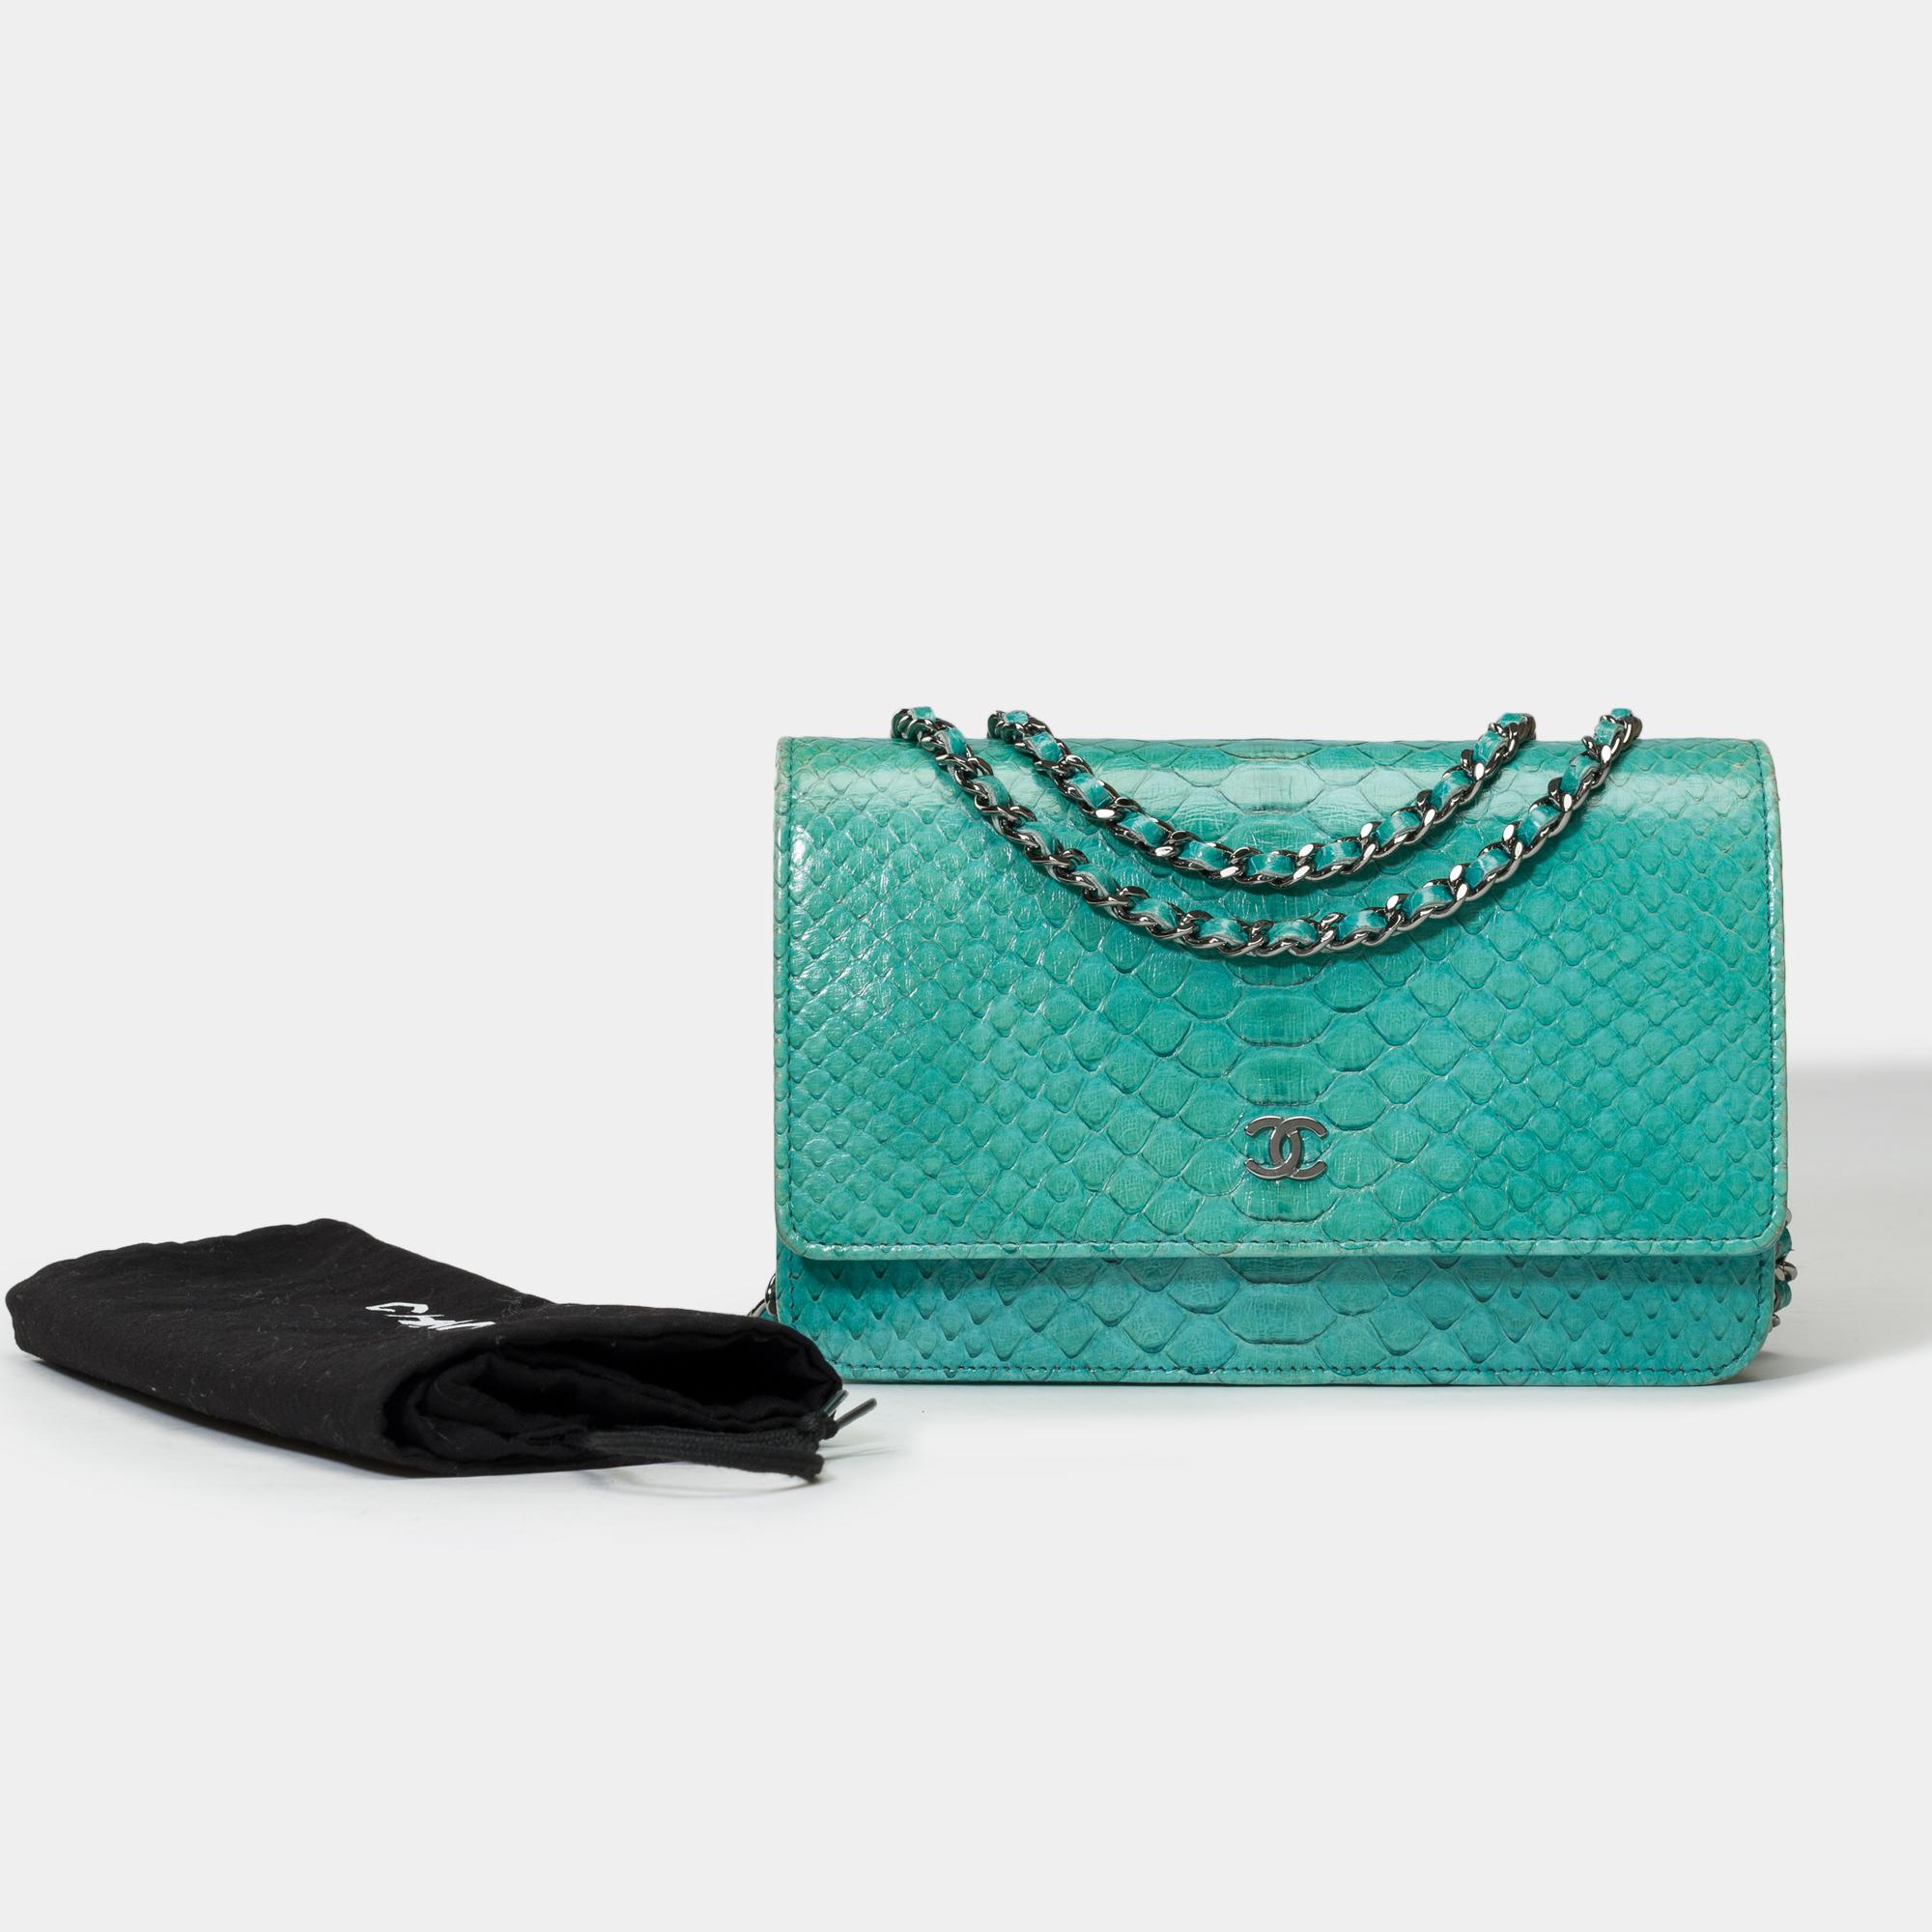 Stunning​ ​Chanel​ ​Wallet​ ​On​ ​Chain​ ​Bag​ ​(WOC)​ ​in​ ​turquoise​ ​blue​ ​python,​ ​silver​ ​metal​ ​trim,​ ​a​ ​chain​ ​handle​ ​in​ ​silver​ ​metal​ ​interlaced​ ​with​ ​blue​ ​leather​ ​allowing​ ​a​ ​shoulder​ ​or​ ​crossbody​